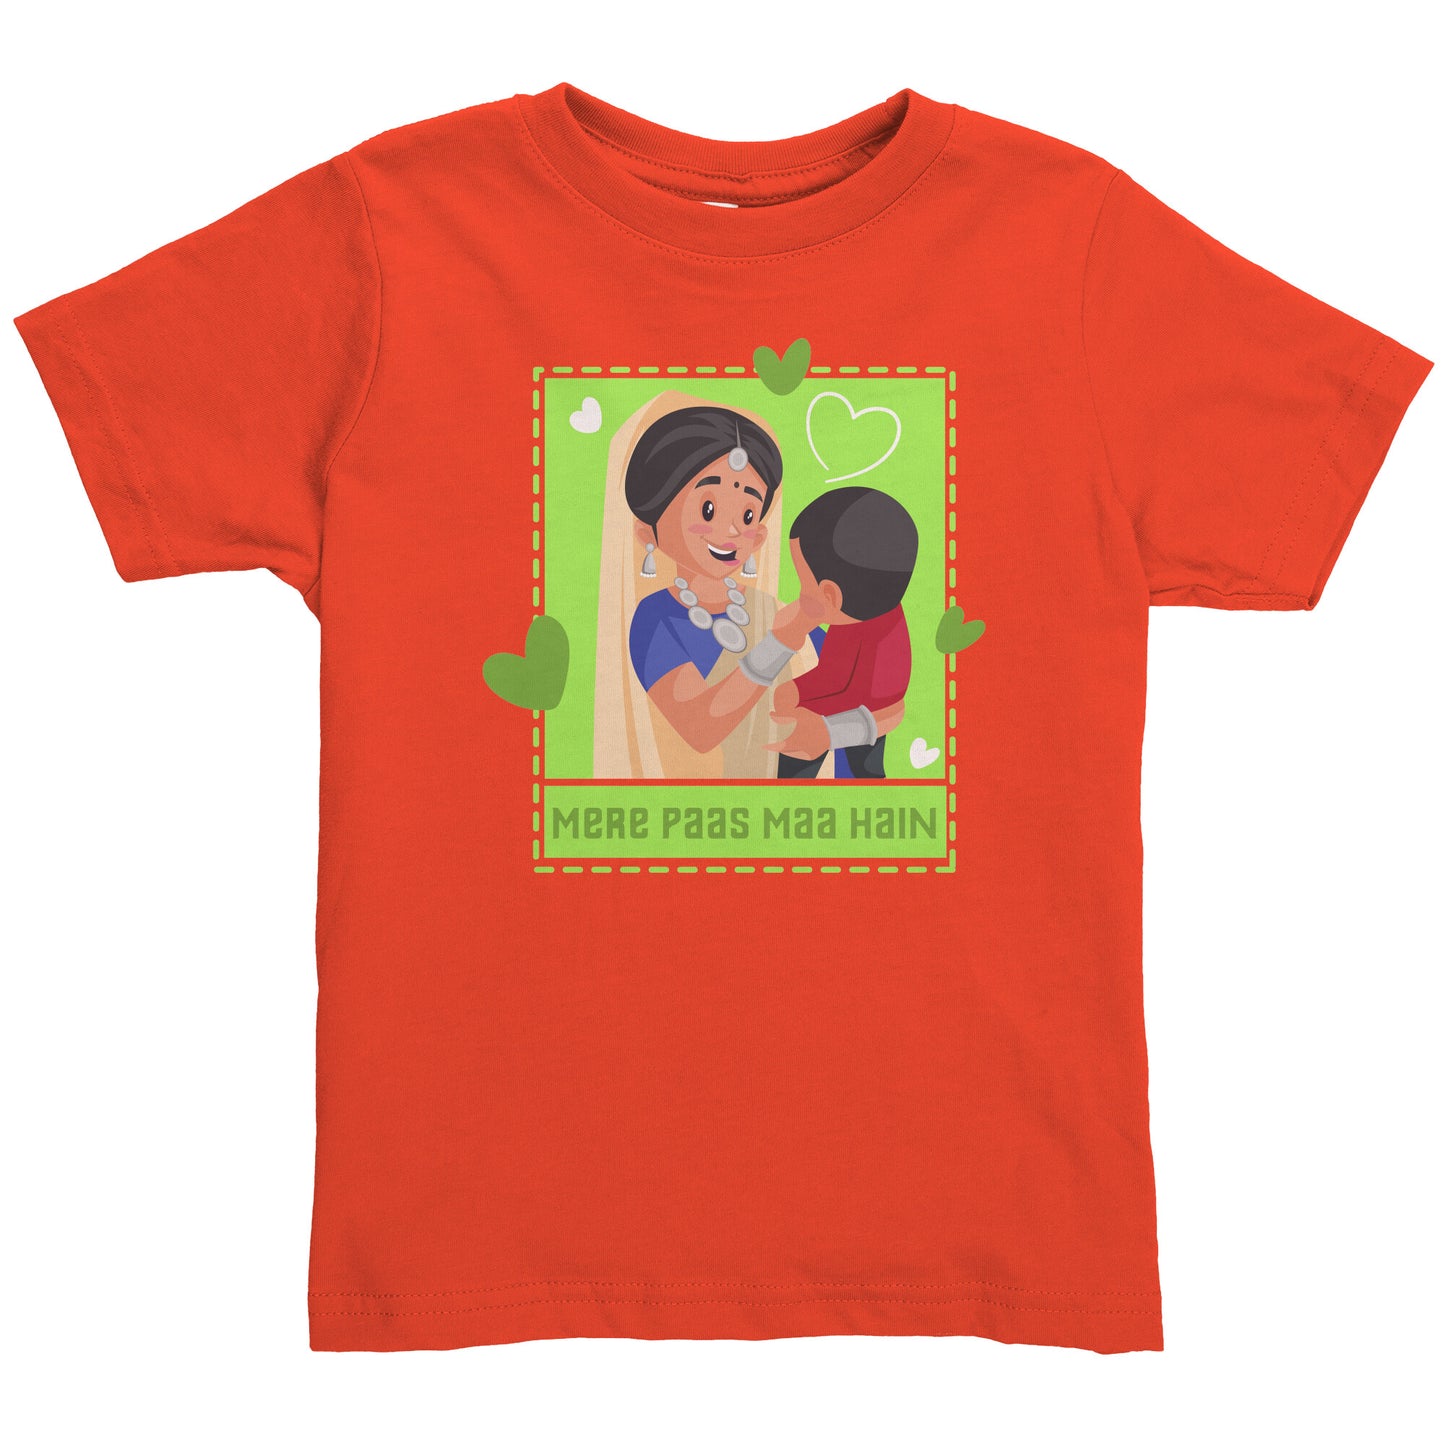 Mere Paas Maa Hain Toddler Sizes